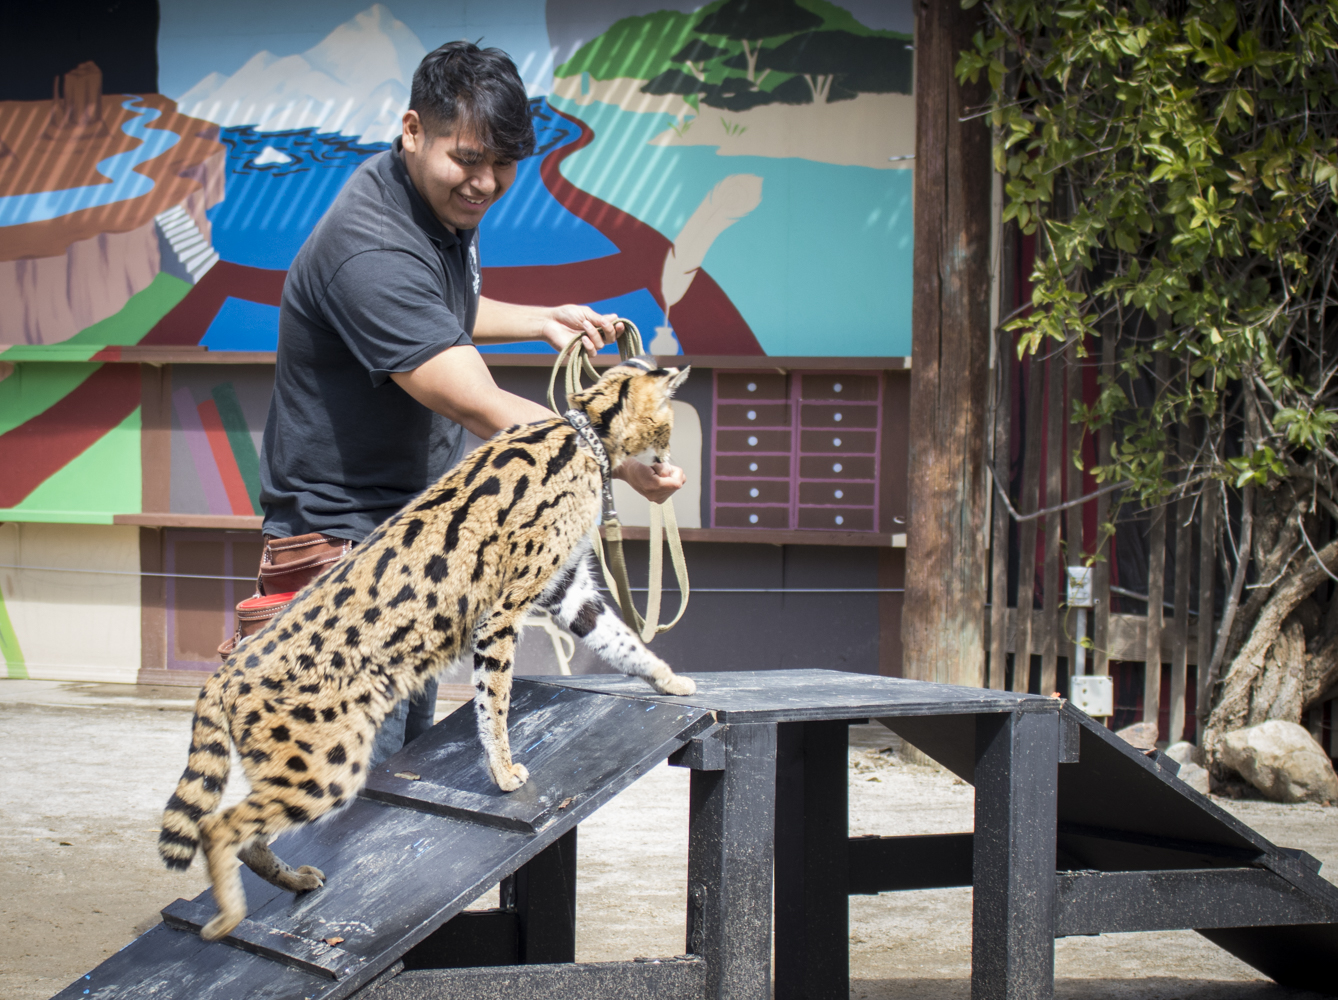 Santiago Flores guides Ibis, a 15 year-old African Serval, during dress rehearsal for the Spring 2019 Spectacular at America's Teaching Zoo on Thursday, March 7, 2019. According to the zoo staff, Ibis is often mistaken for a baby cheetah.